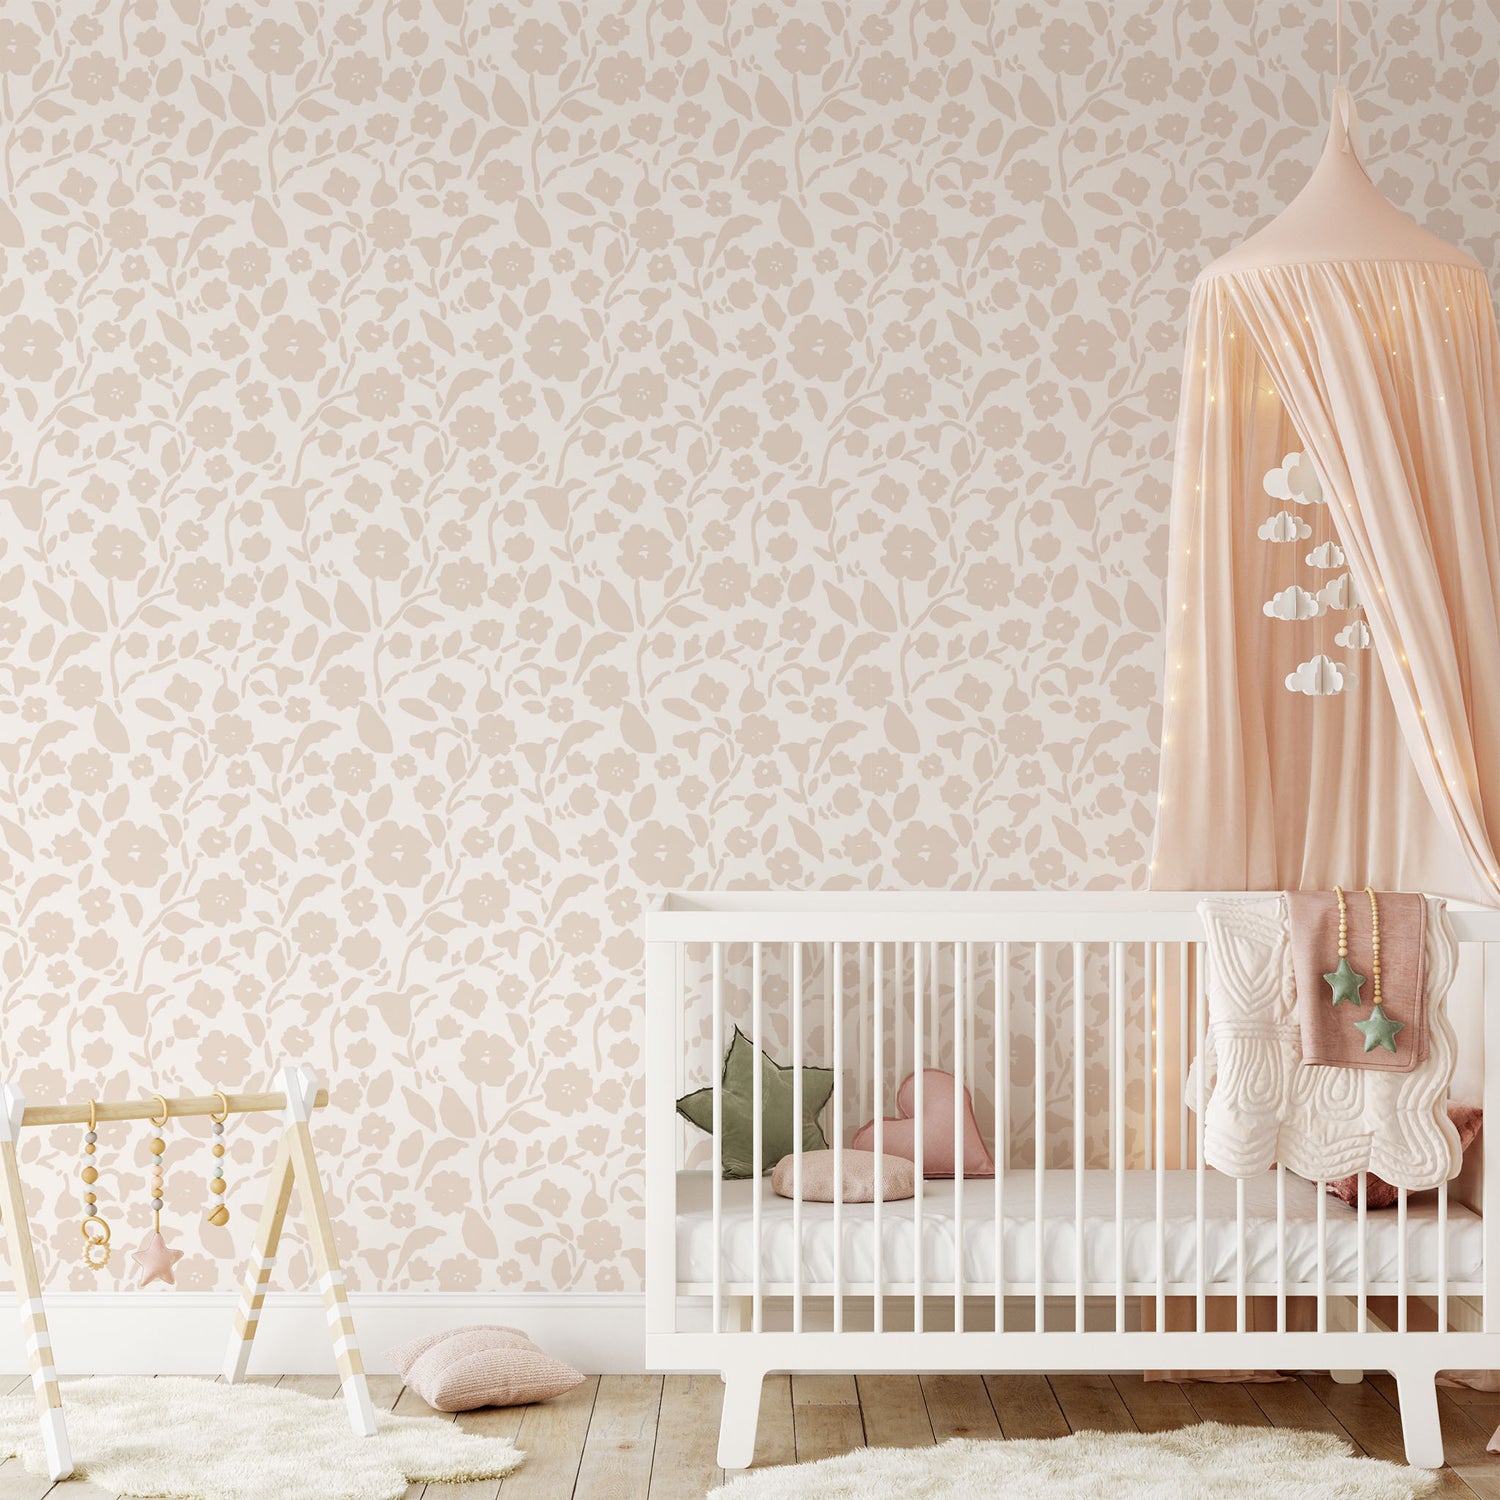 Add a touch of femininity to your space with our Lexington Wallpaper in a soft pink hue shown in full size image.